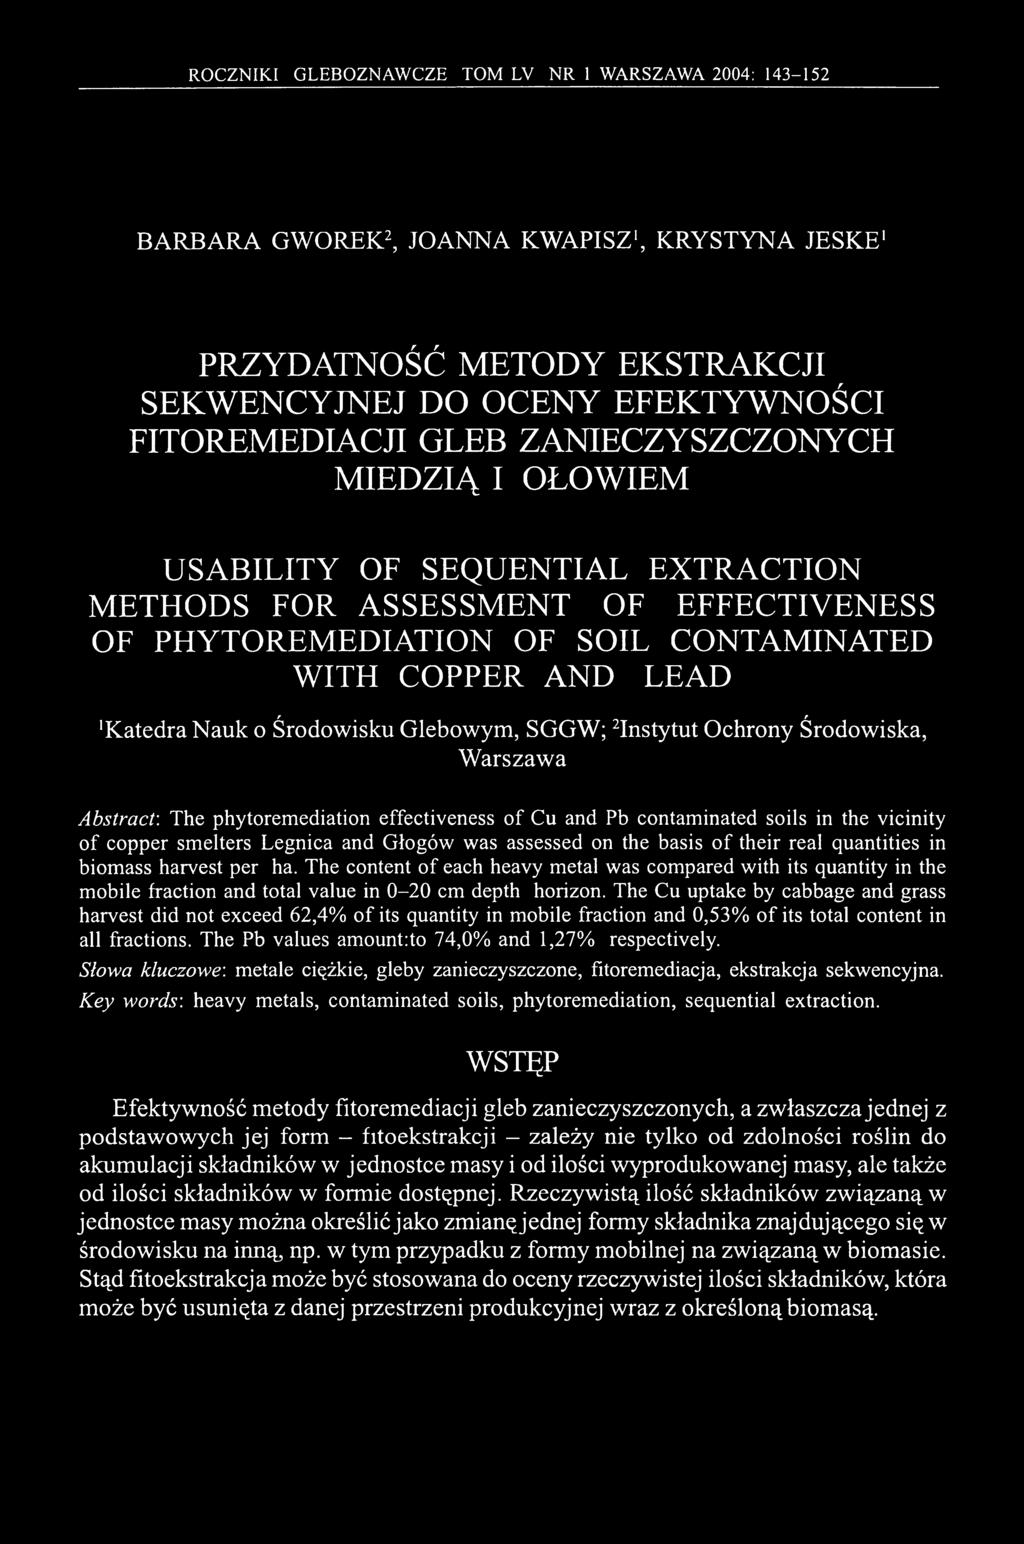 Glebowym, SGGW; 2Instytut Ochrony Środowiska, Warszawa Abstract: The phytoremediation effectiveness of Cu and Pb contaminated soils in the vicinity of copper smelters Legnica and Głogów was assessed